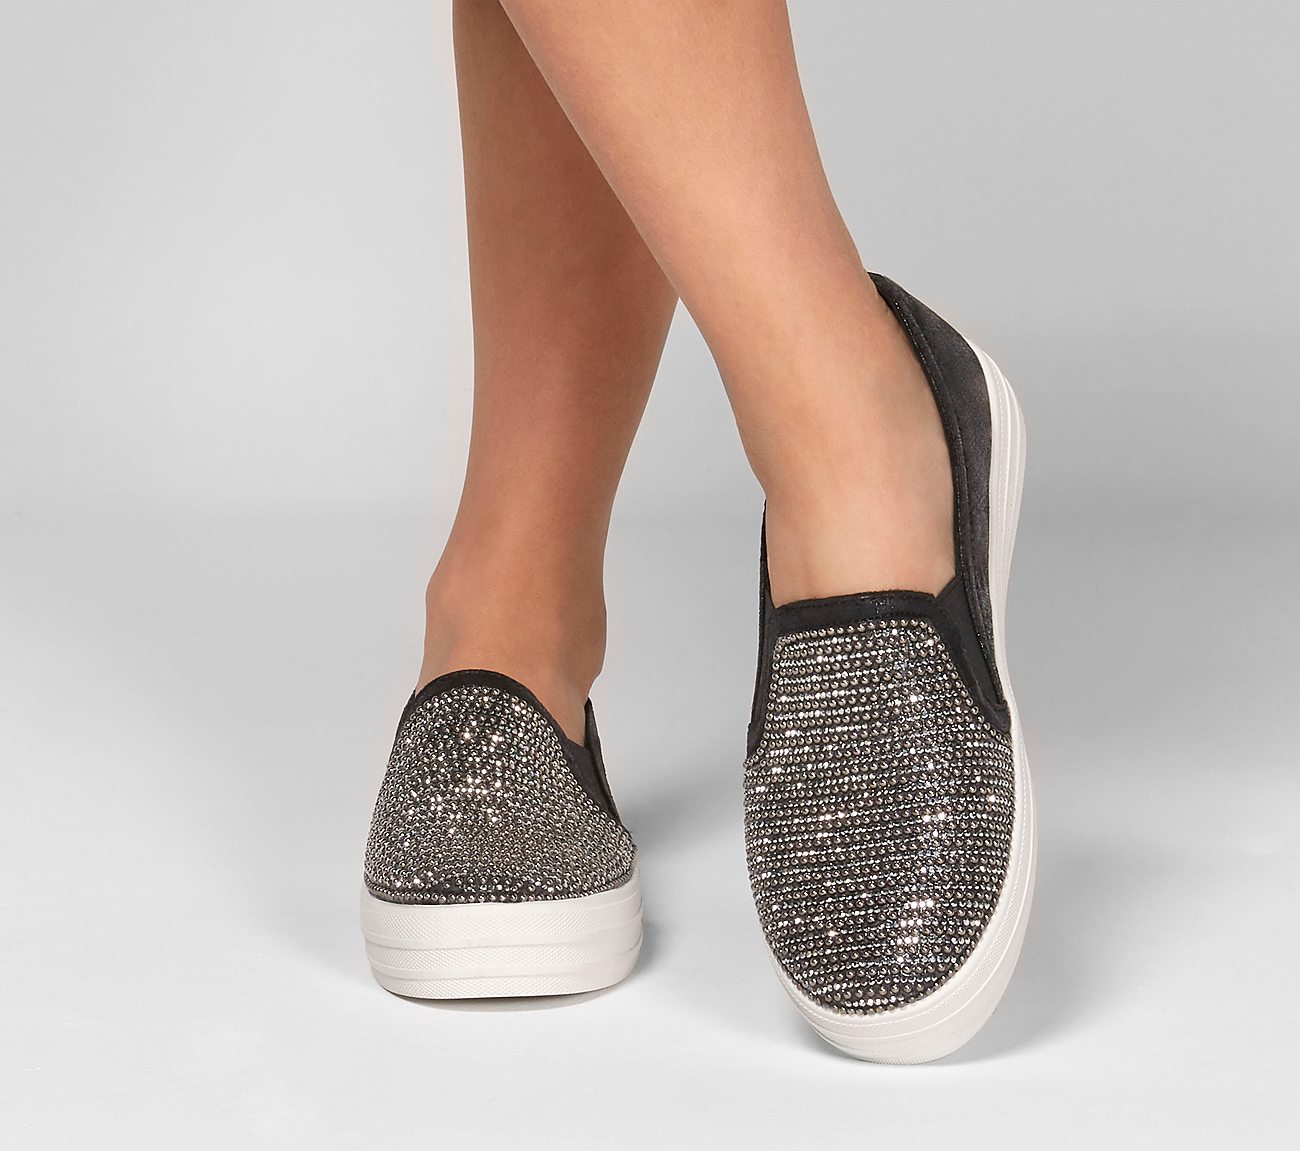 skechers with glitter